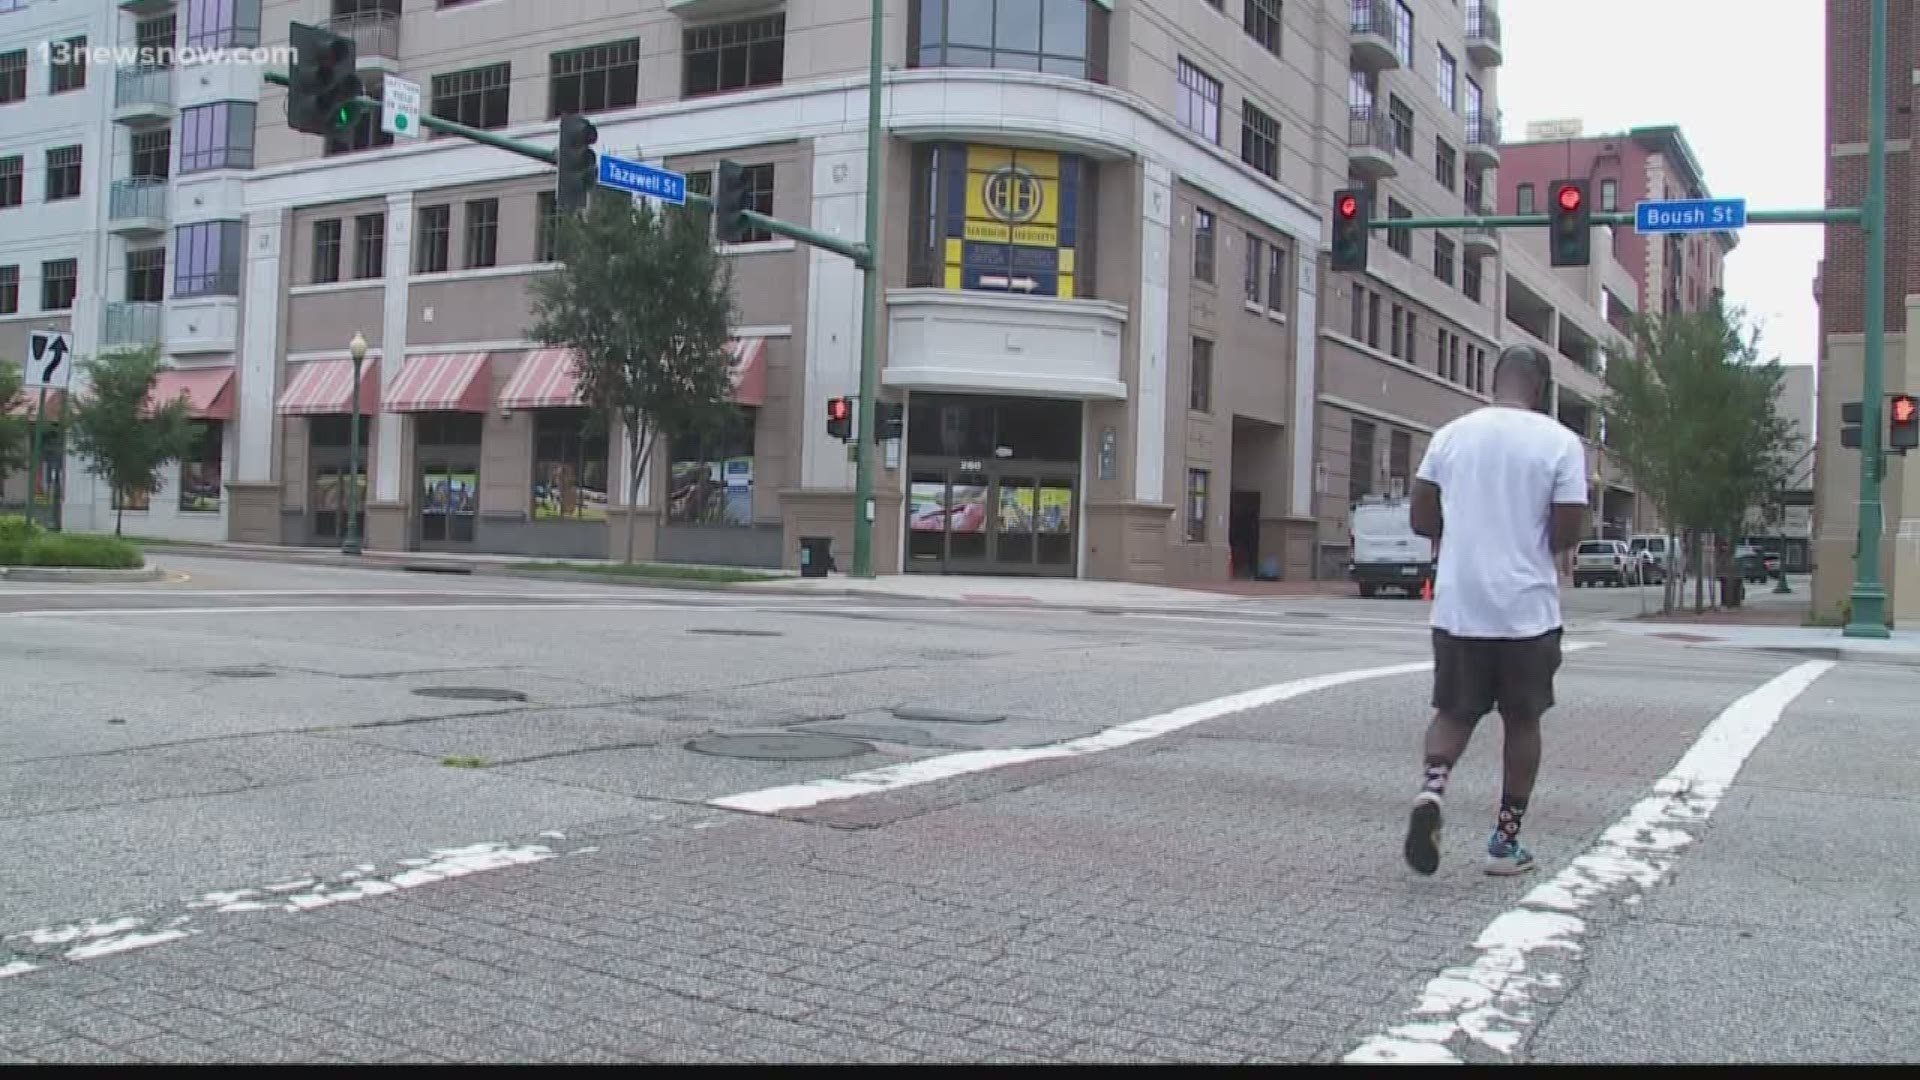 13News Now Evan Watson looked into the initiative to get a grocery store into downtown Norfolk. But as he found out, it's not so easy.